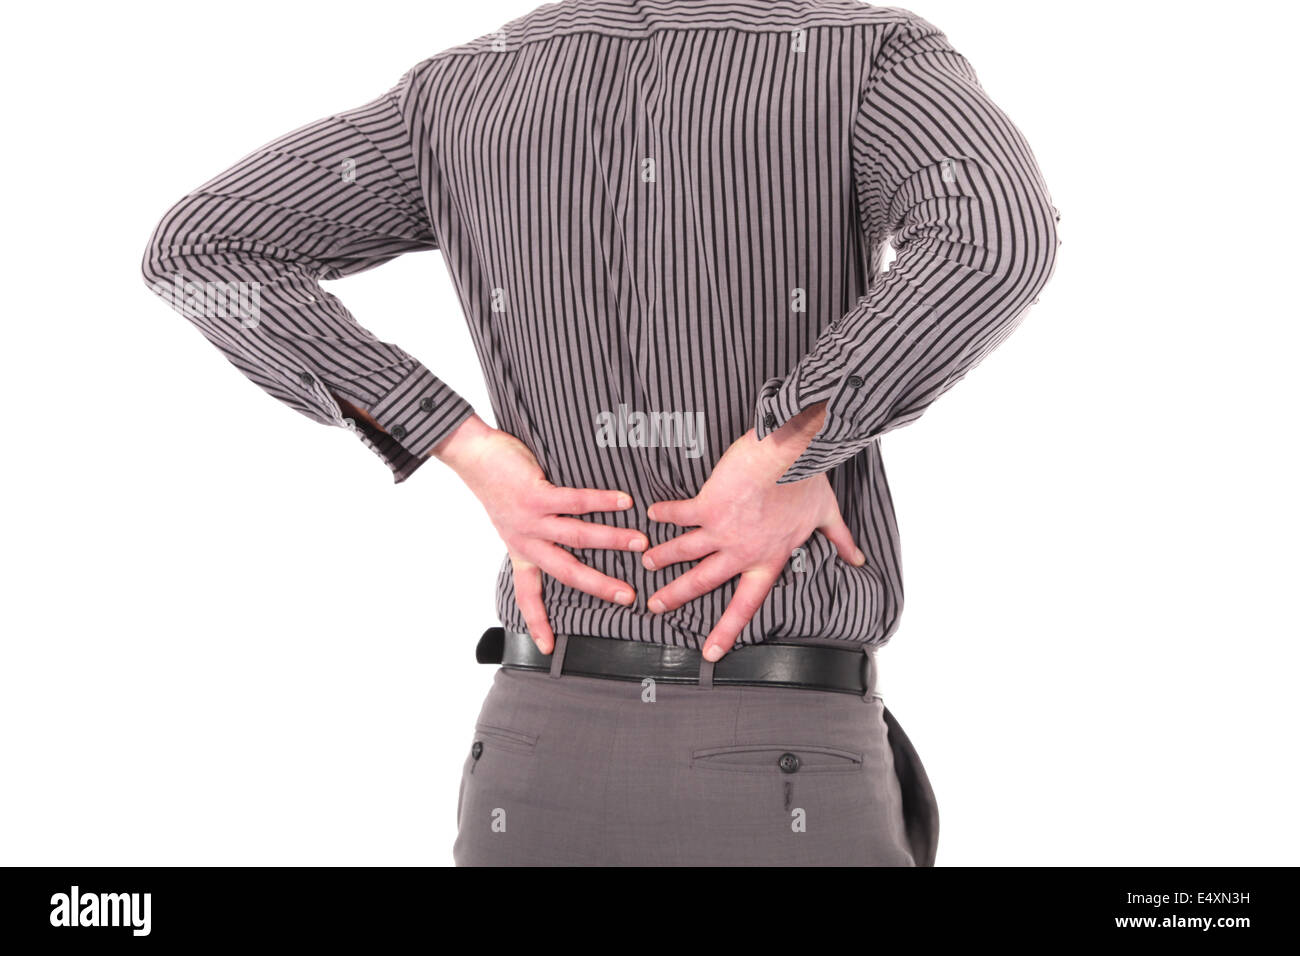 Man with lower back pain Stock Photo